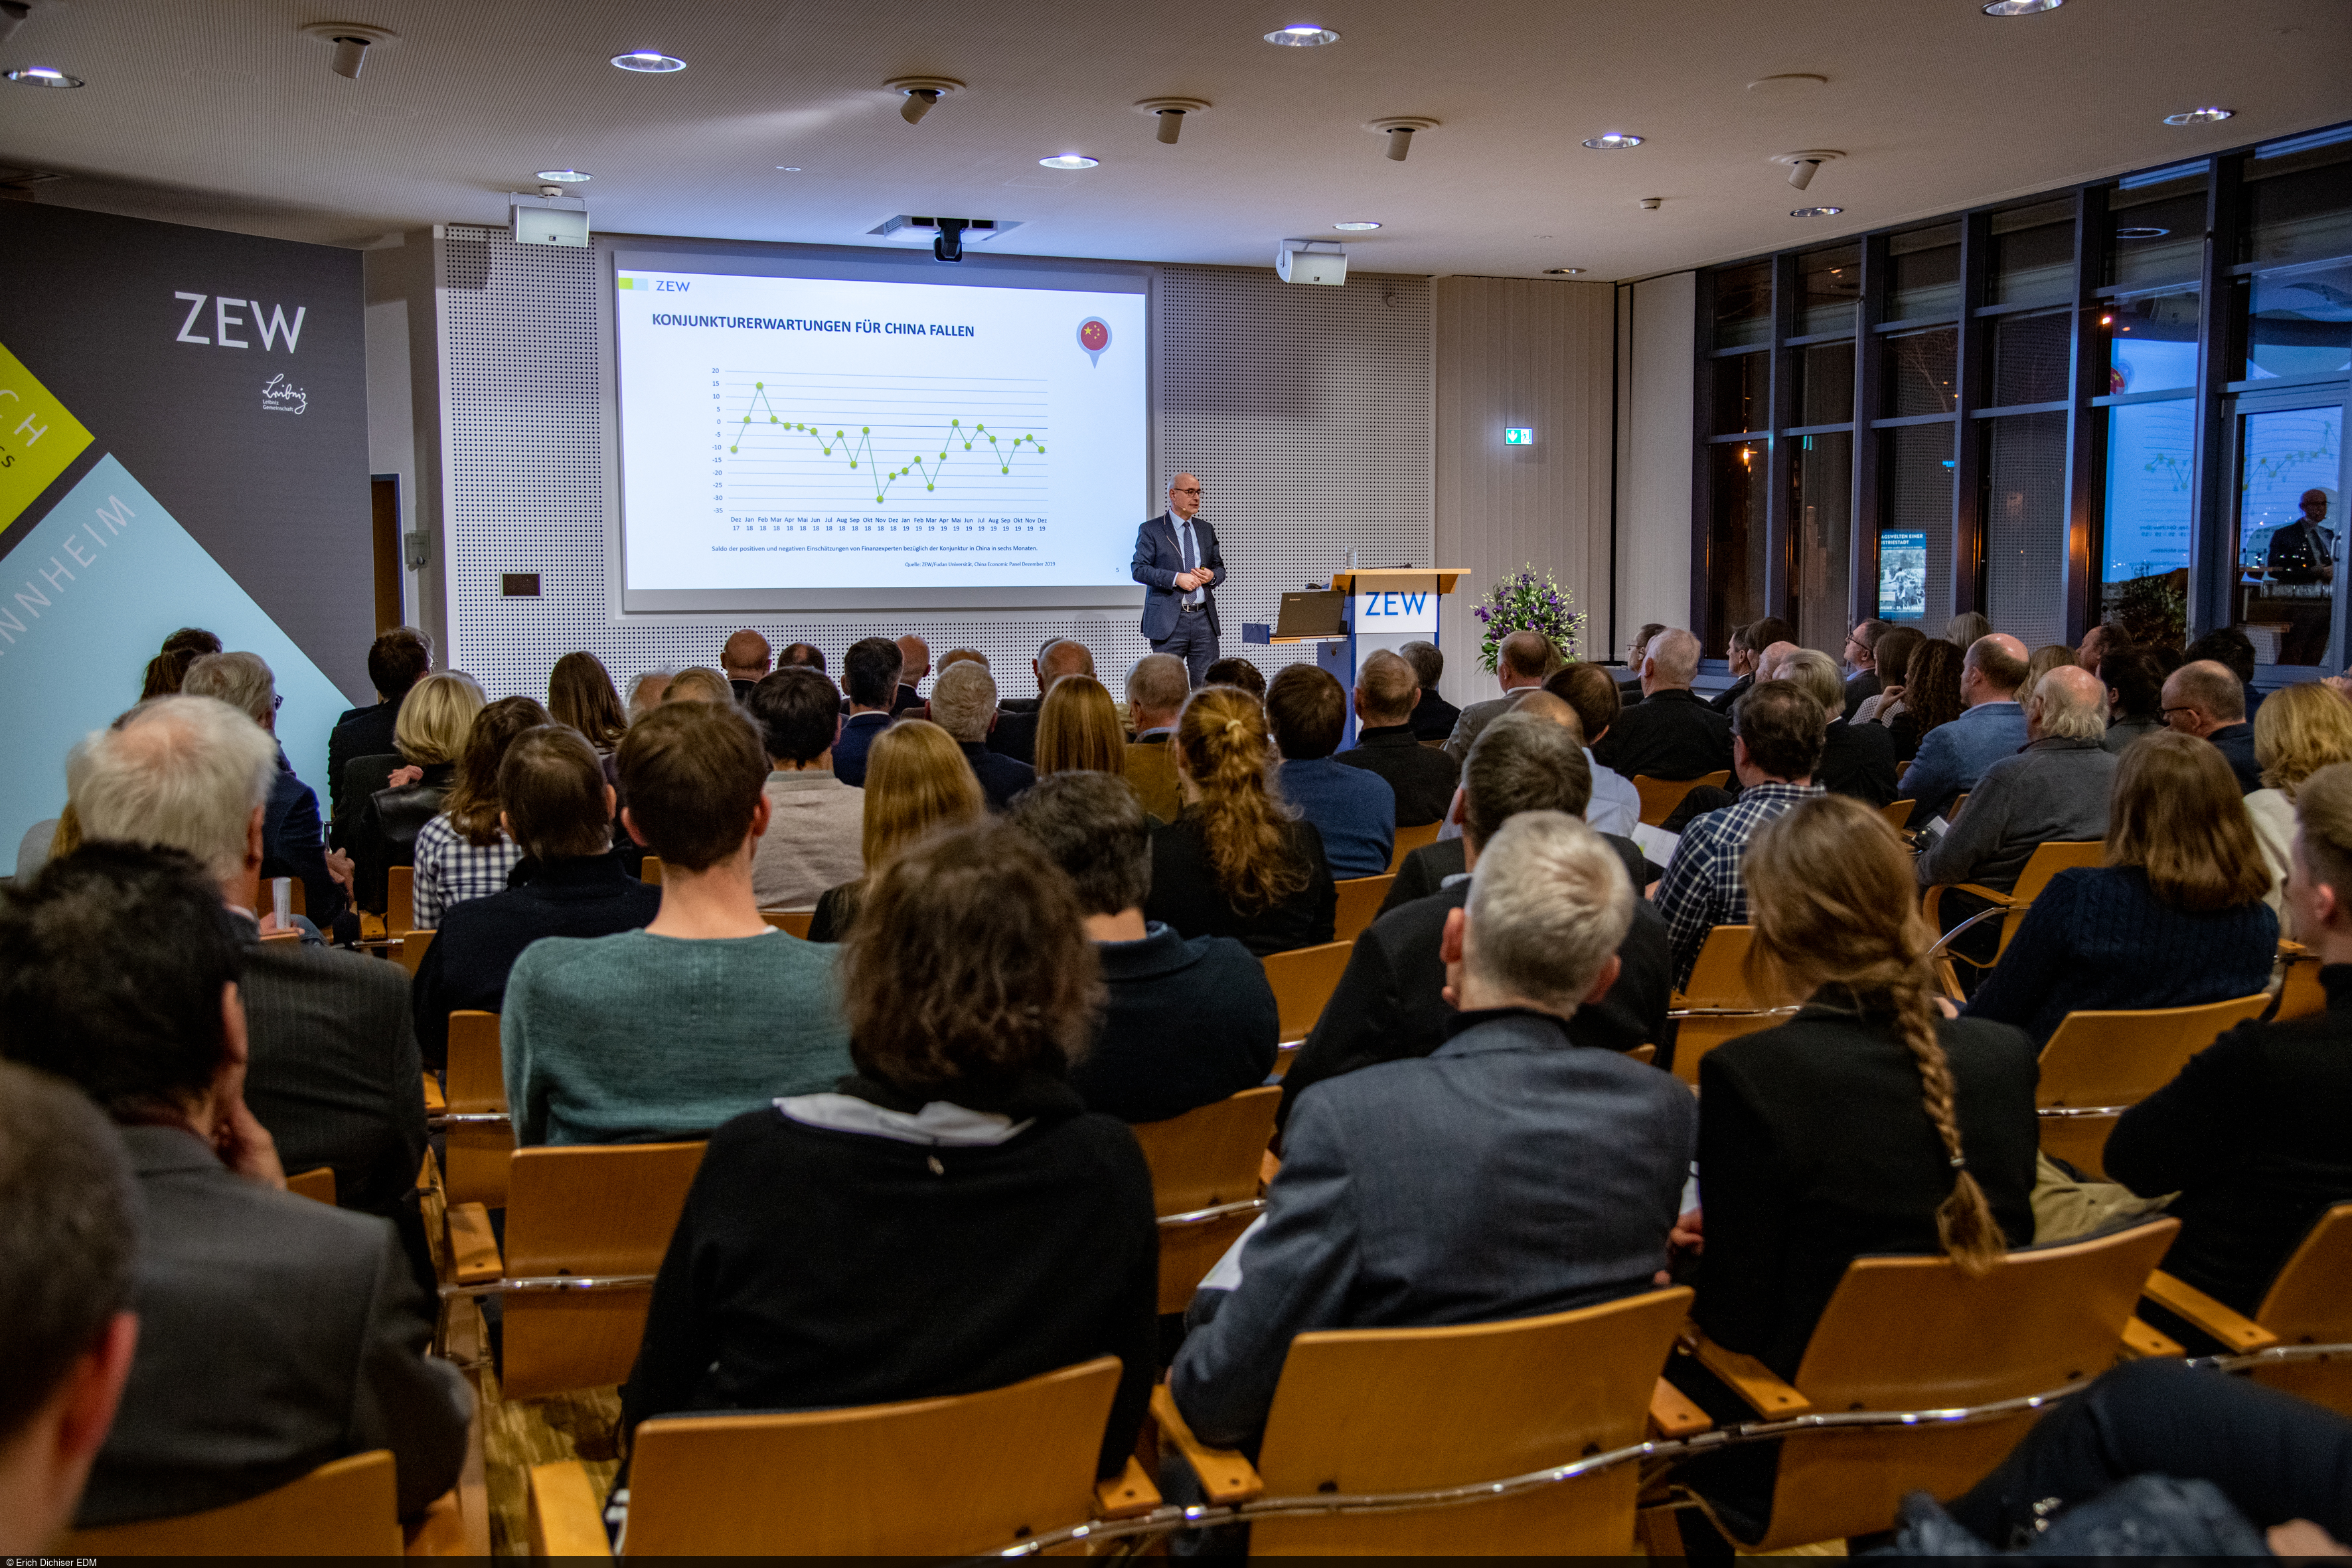 About 110 guests attended the New Year's Lecture at ZEW with Achim Wambach.